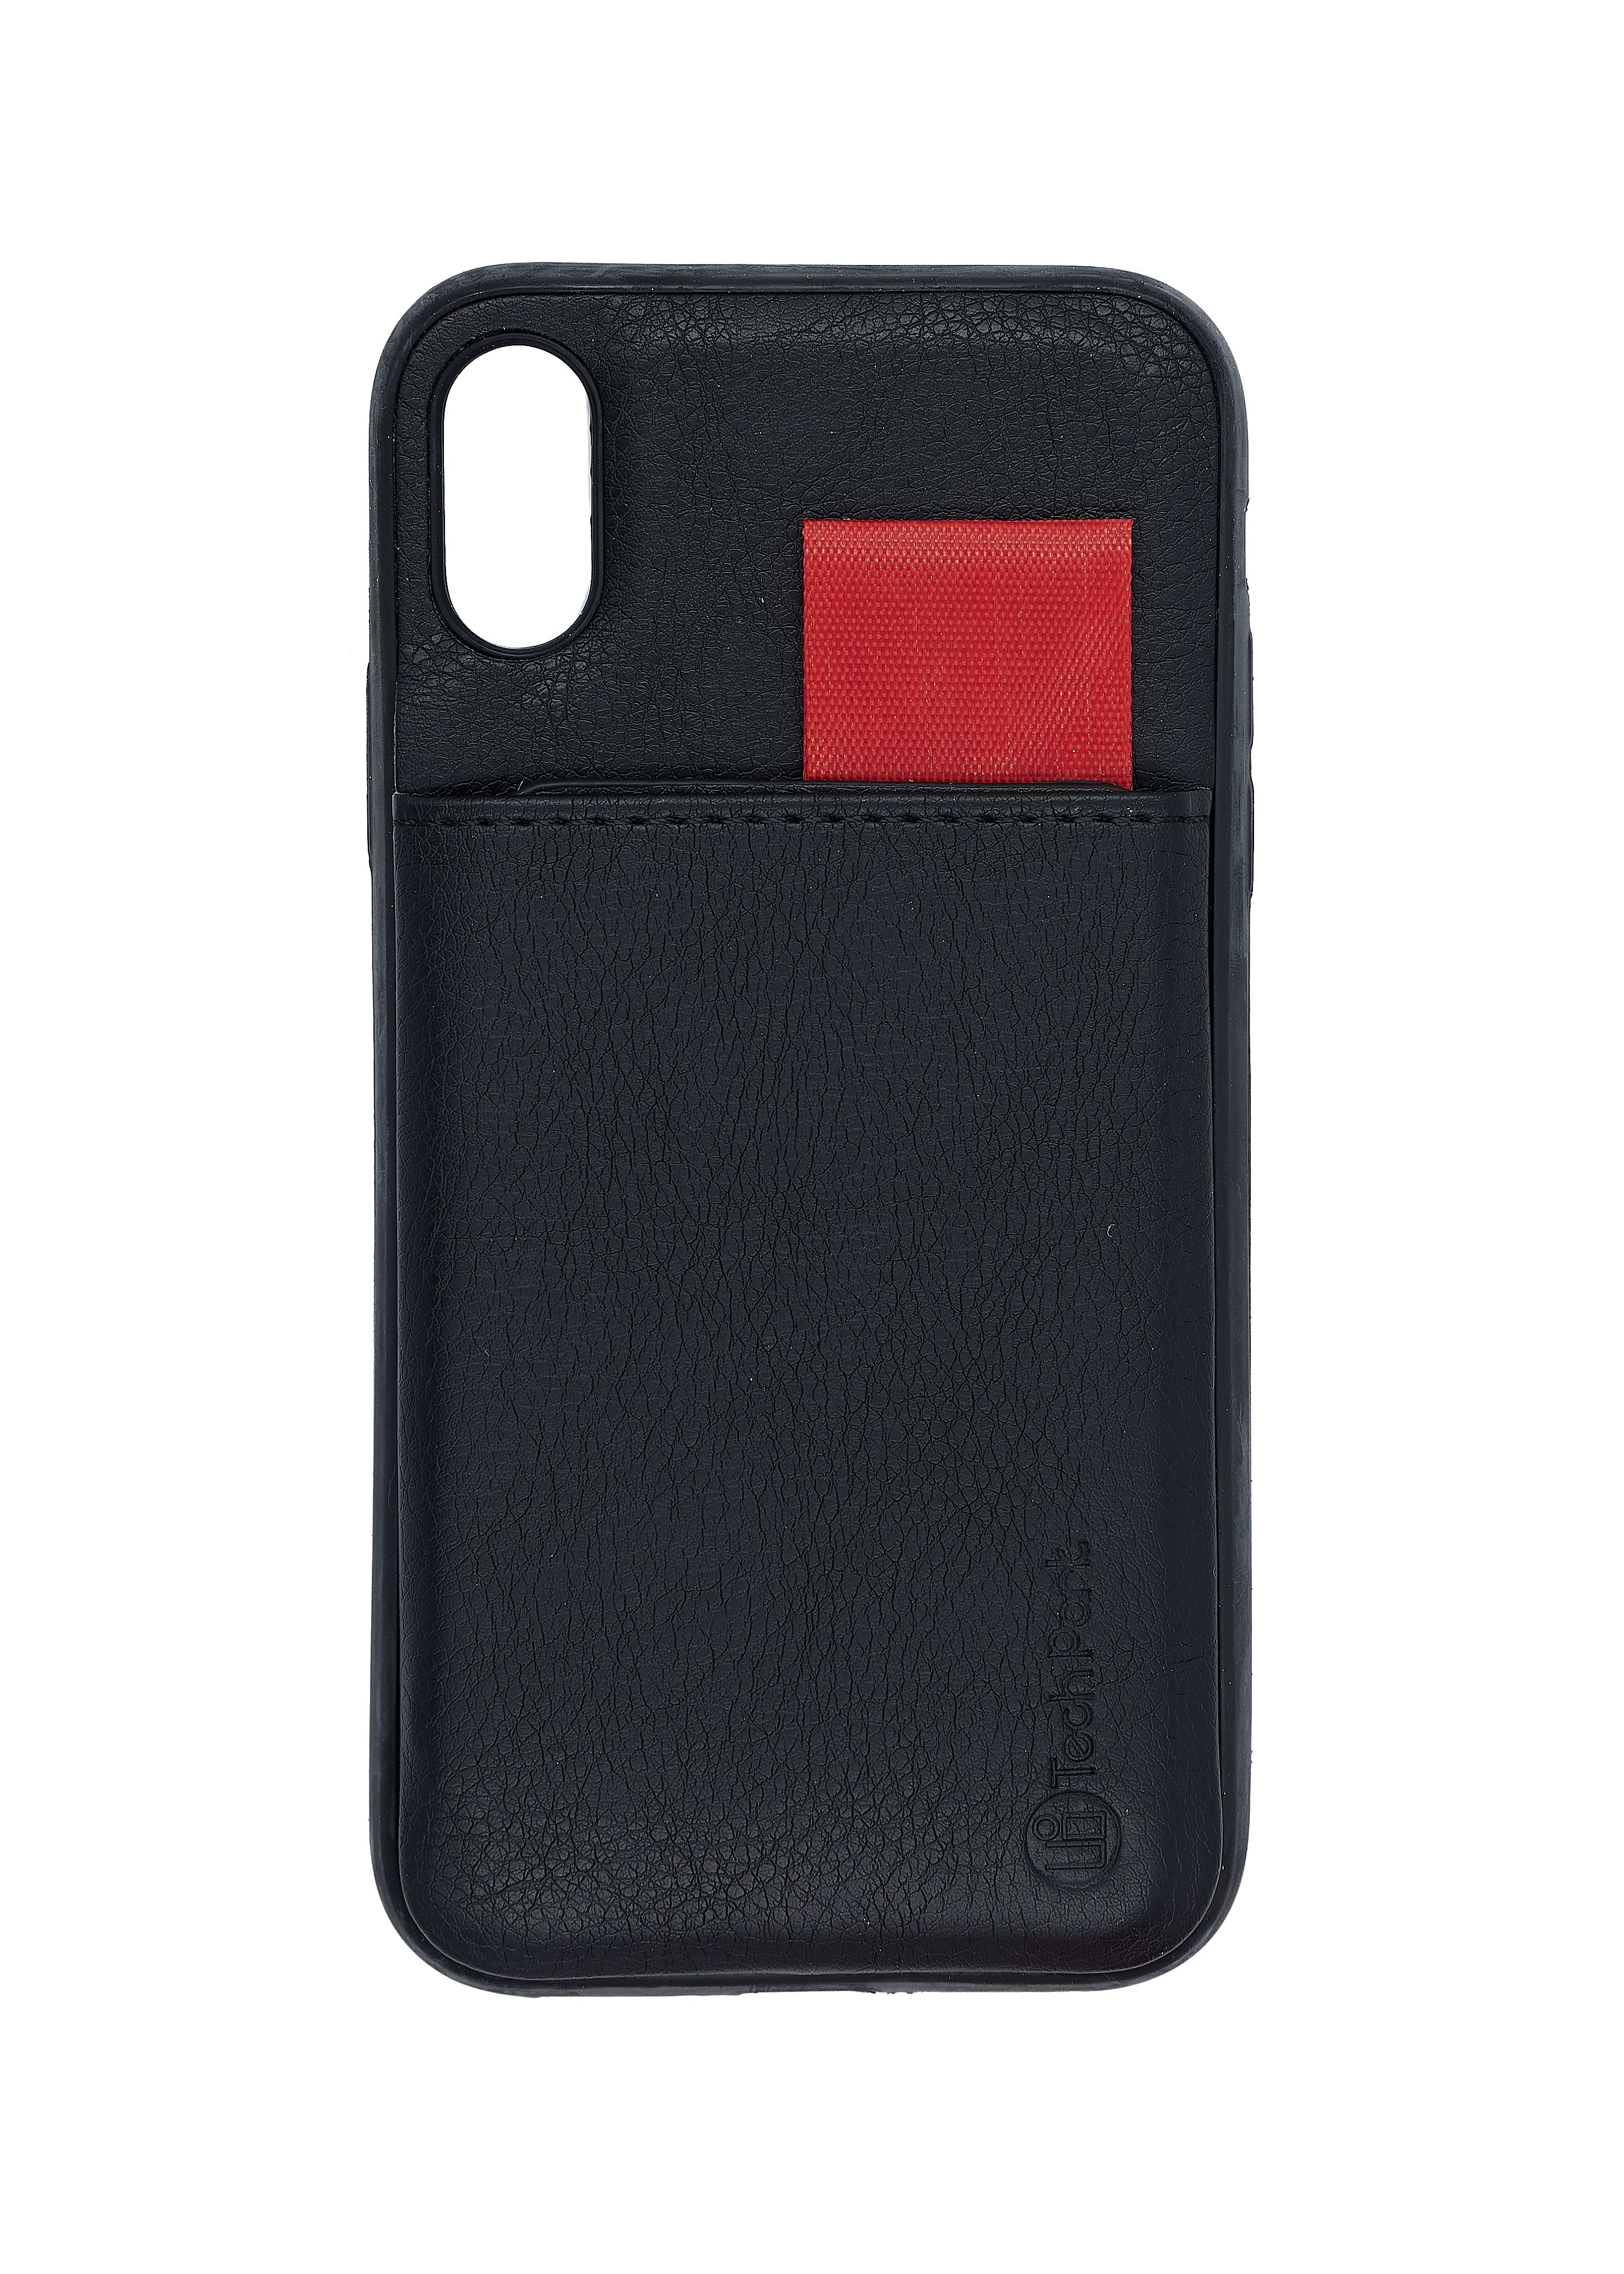 UI Leather iPhone Case with Card Holder